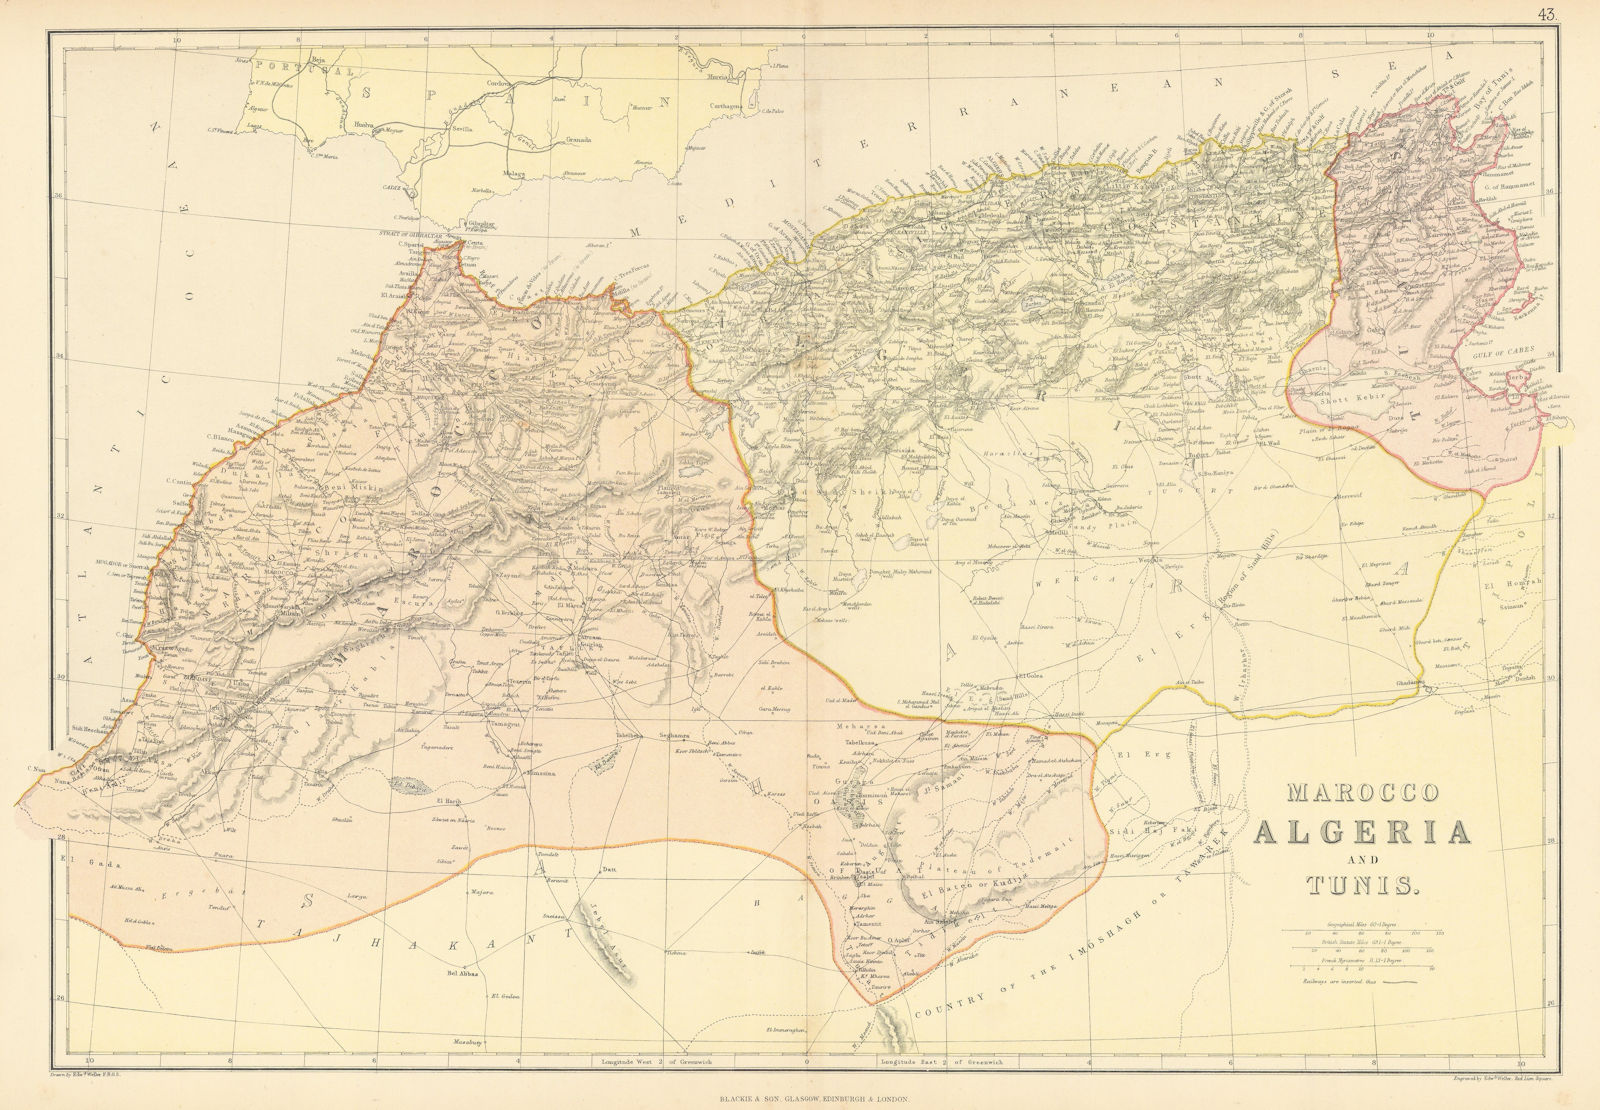 MAGHREB. North Africa. Marocco Algeria and Tunis. BLACKIE 1886 old antique map